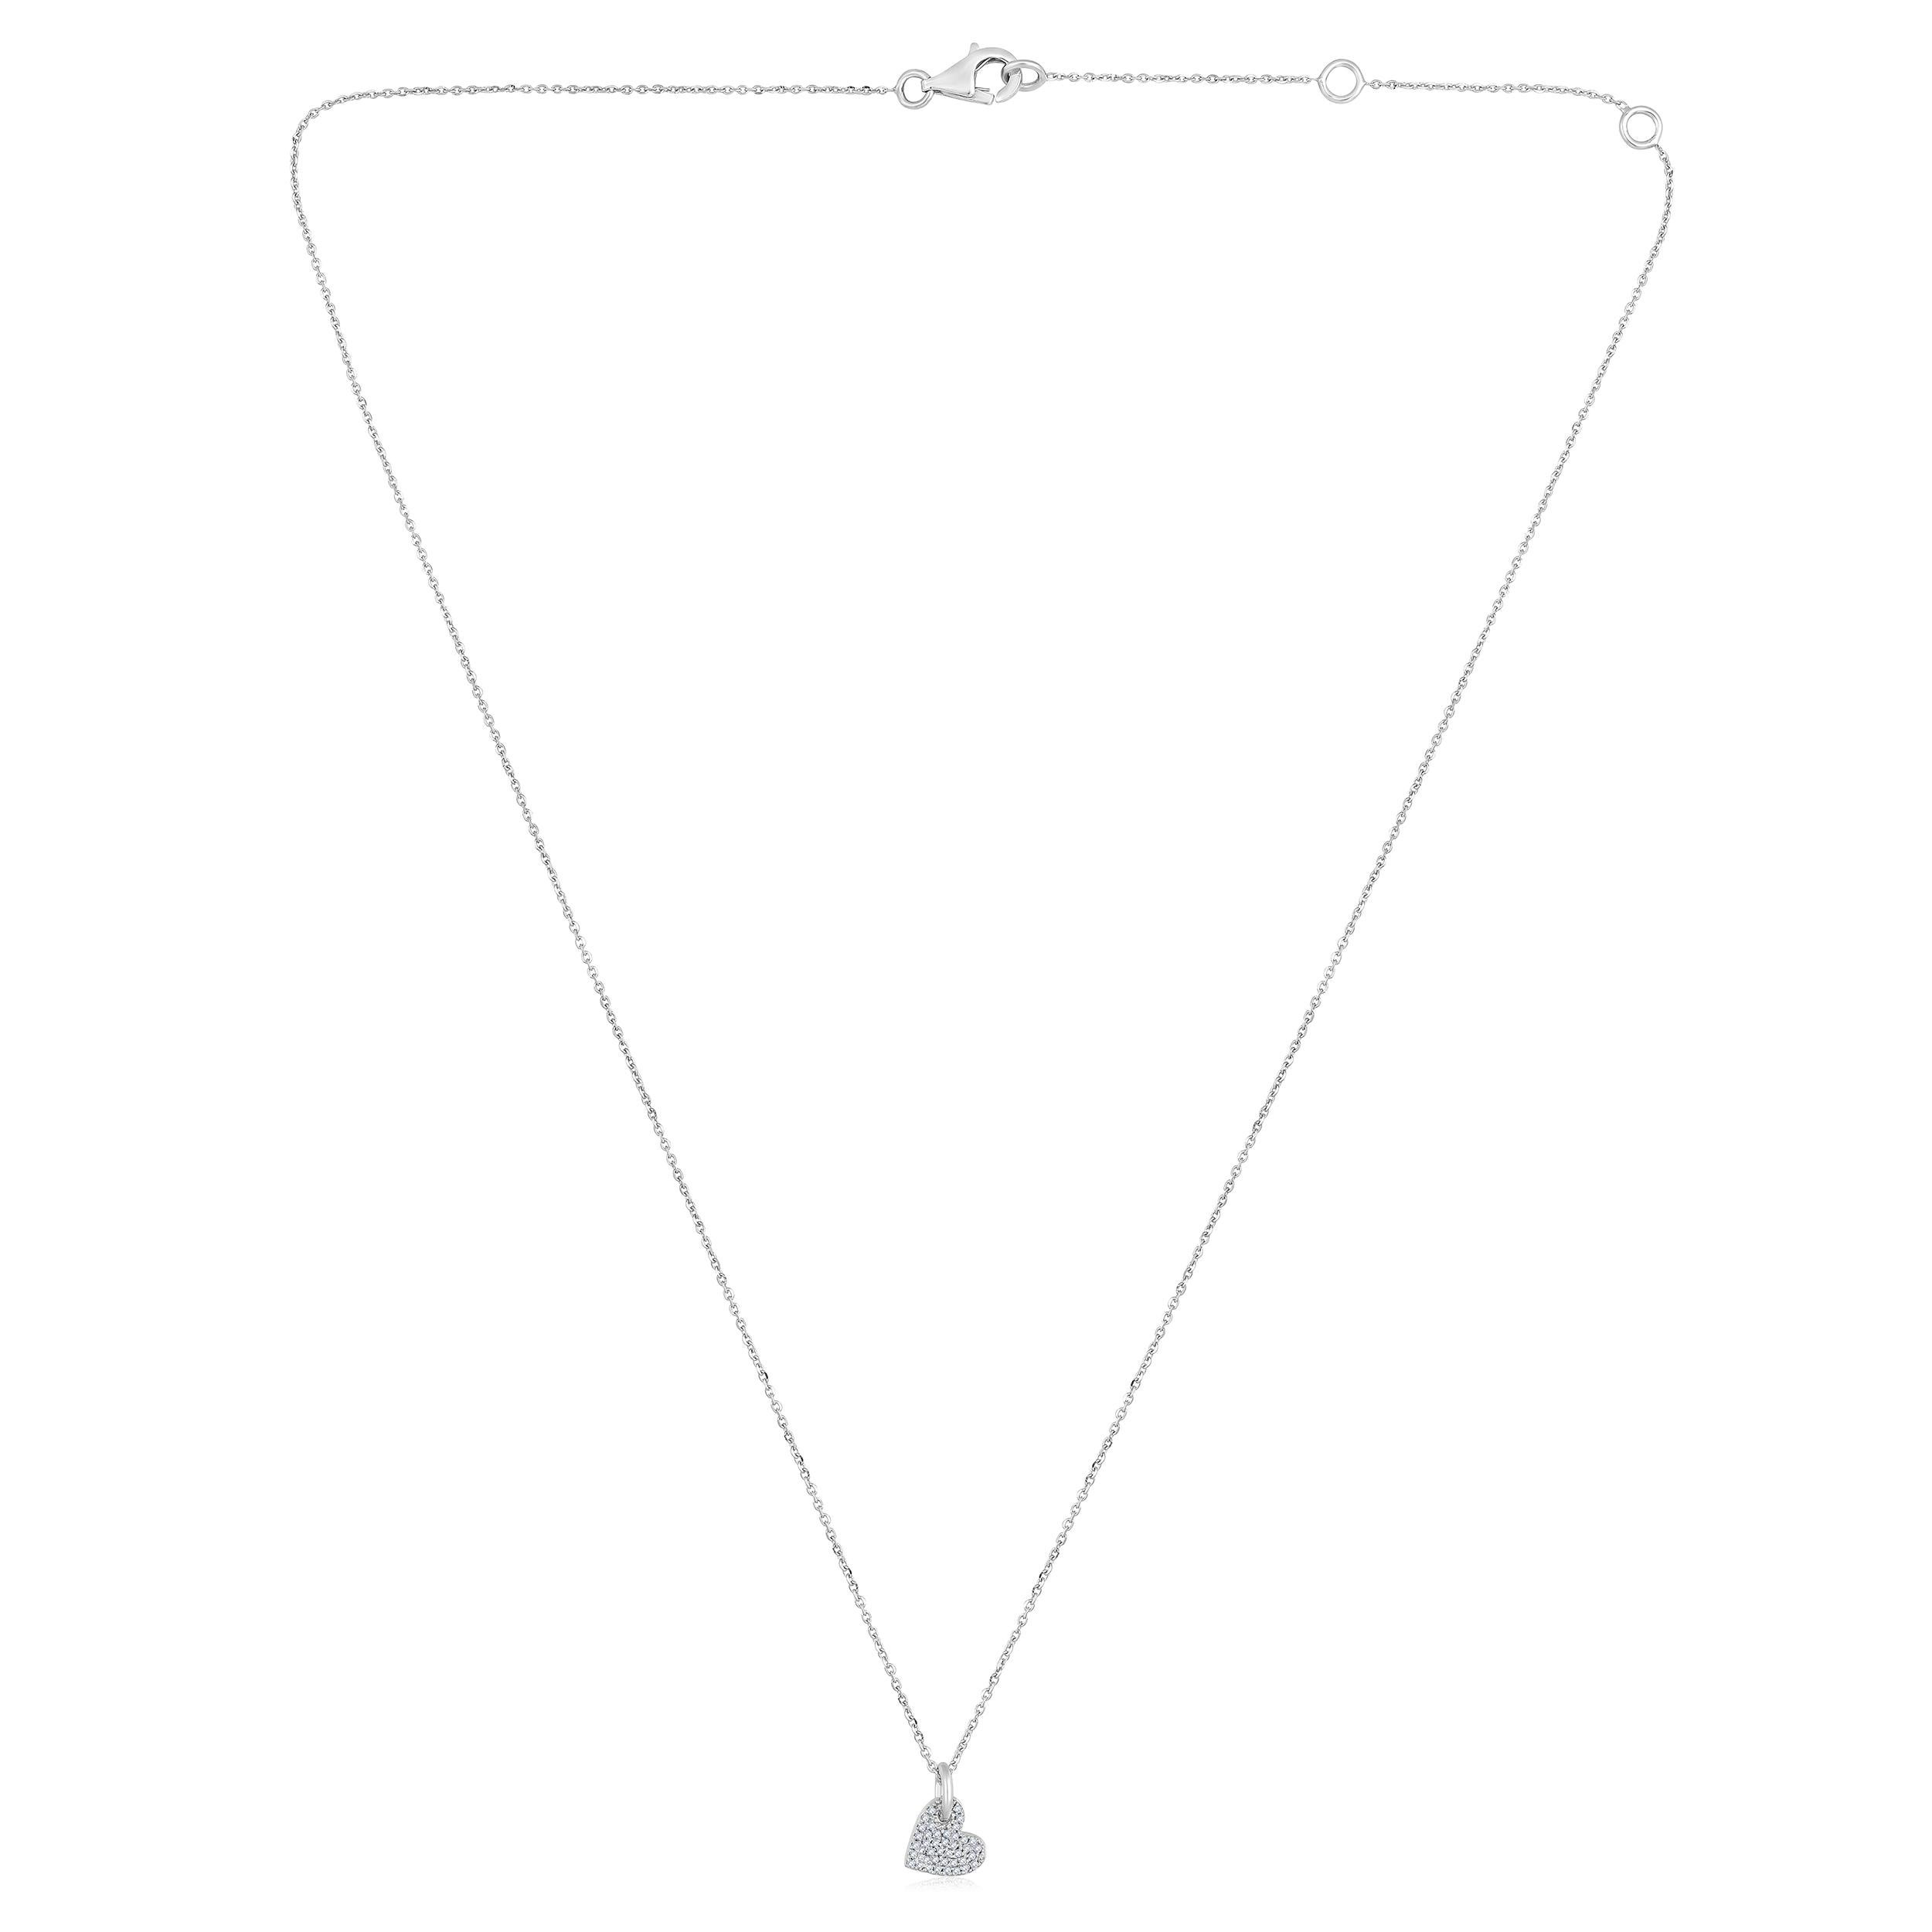 Crafted in 1.93 grams of 14K White Gold, the necklace contains 43 stones of Round Natural Diamonds with a total of 0.09 carat in F-G color and I1-I2 clarity. The necklace length is 18 inches.
This jewelry piece will be expertly crafted by our